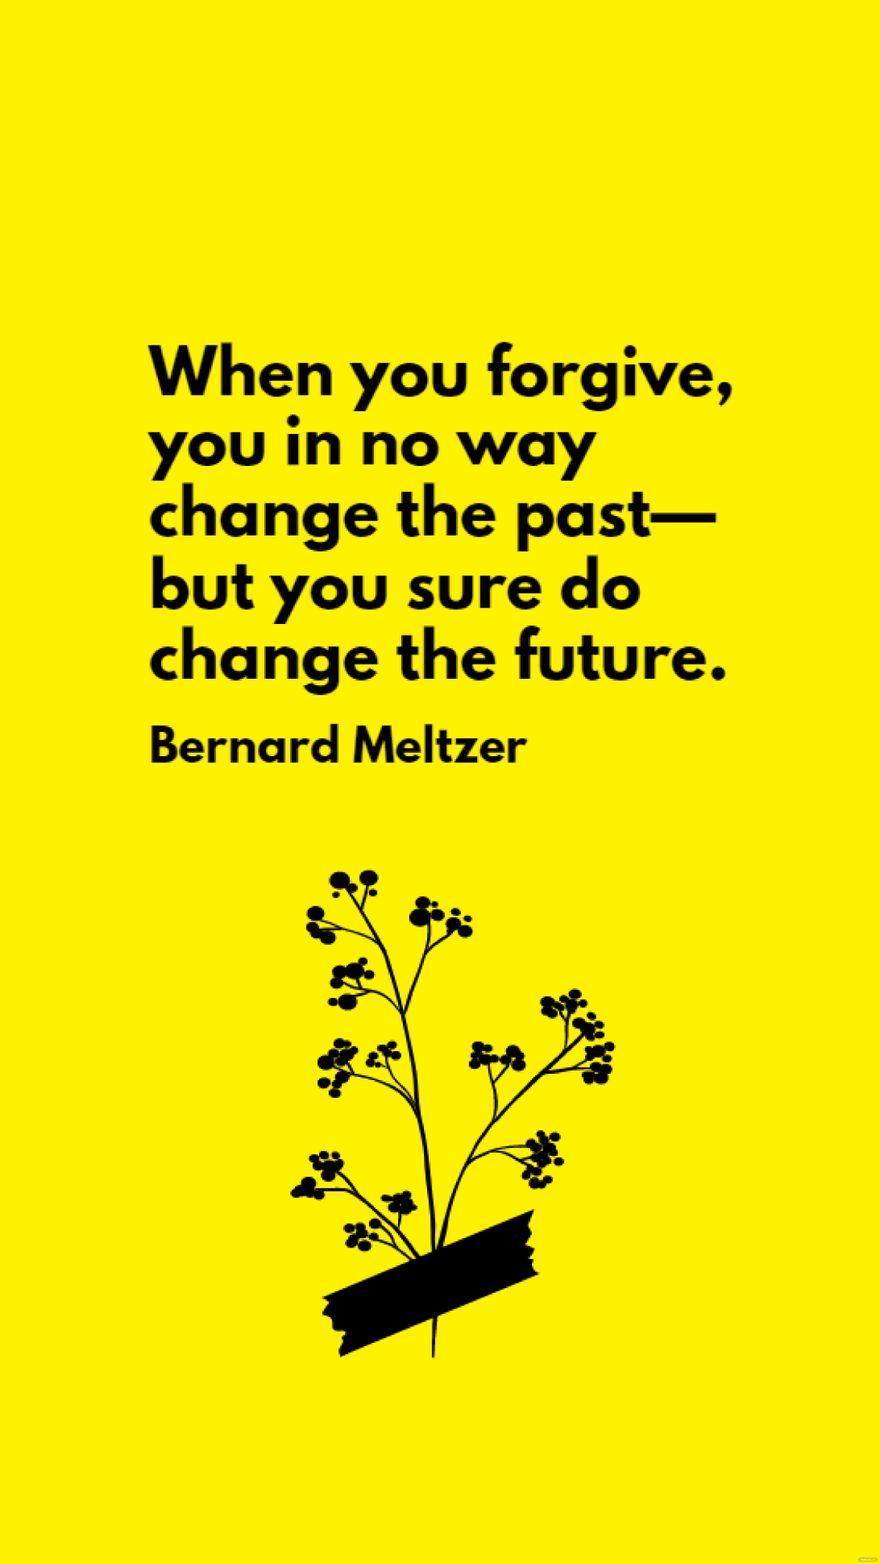 Bernard Meltzer - When you forgive, you in no way change the past - but you sure do change the future.